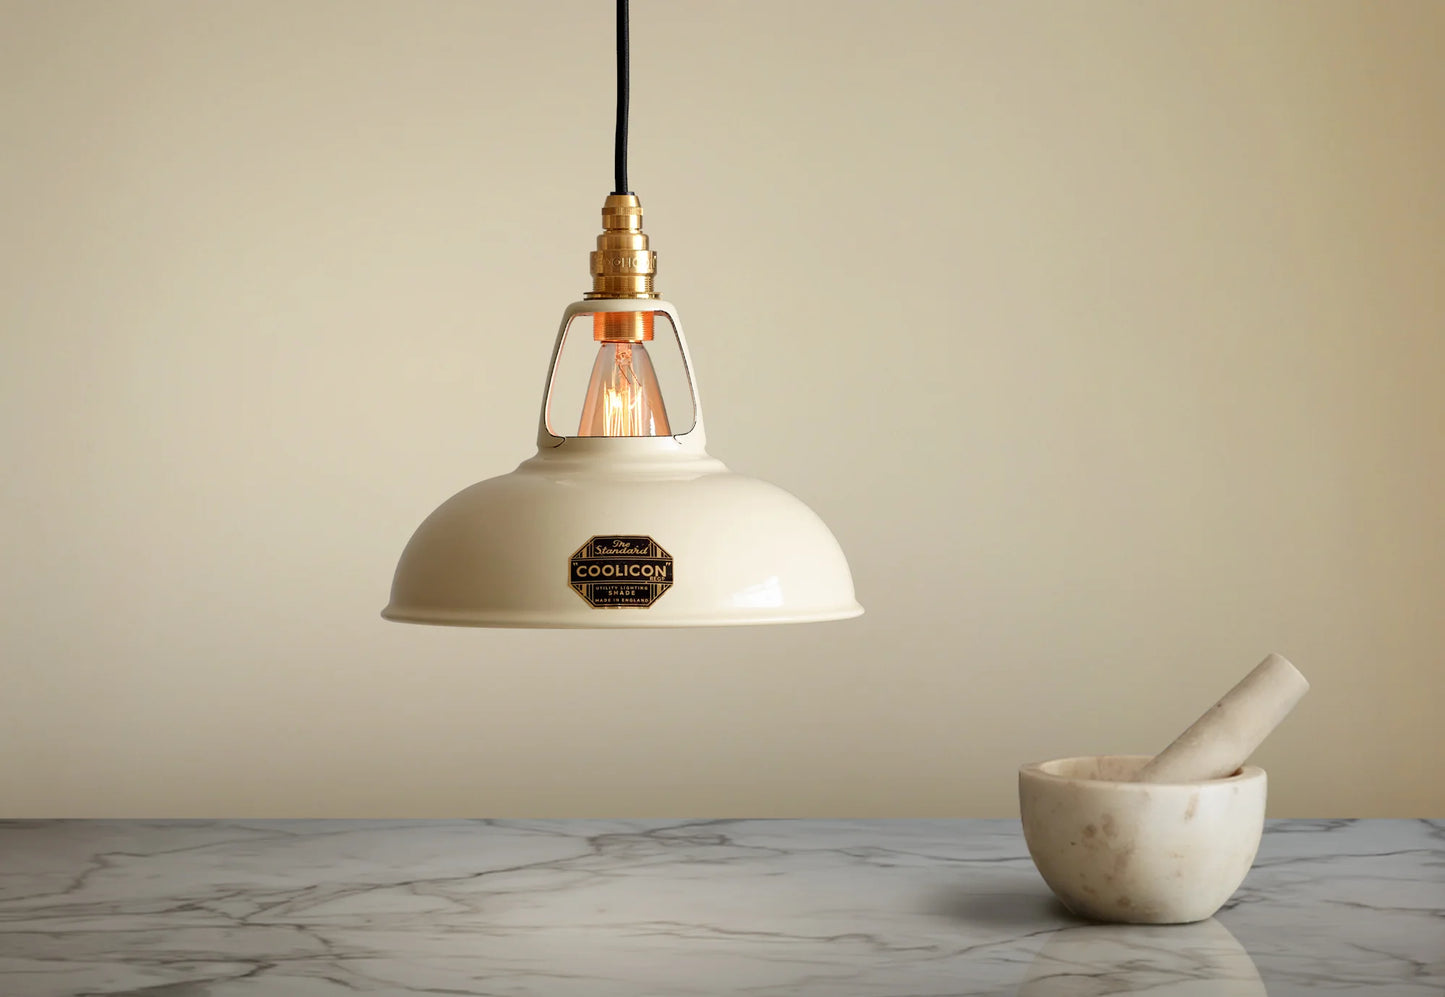 A Coolicon Classic Cream lampshade hanging over a marble table. A marble mortar and pestle are placed on the table